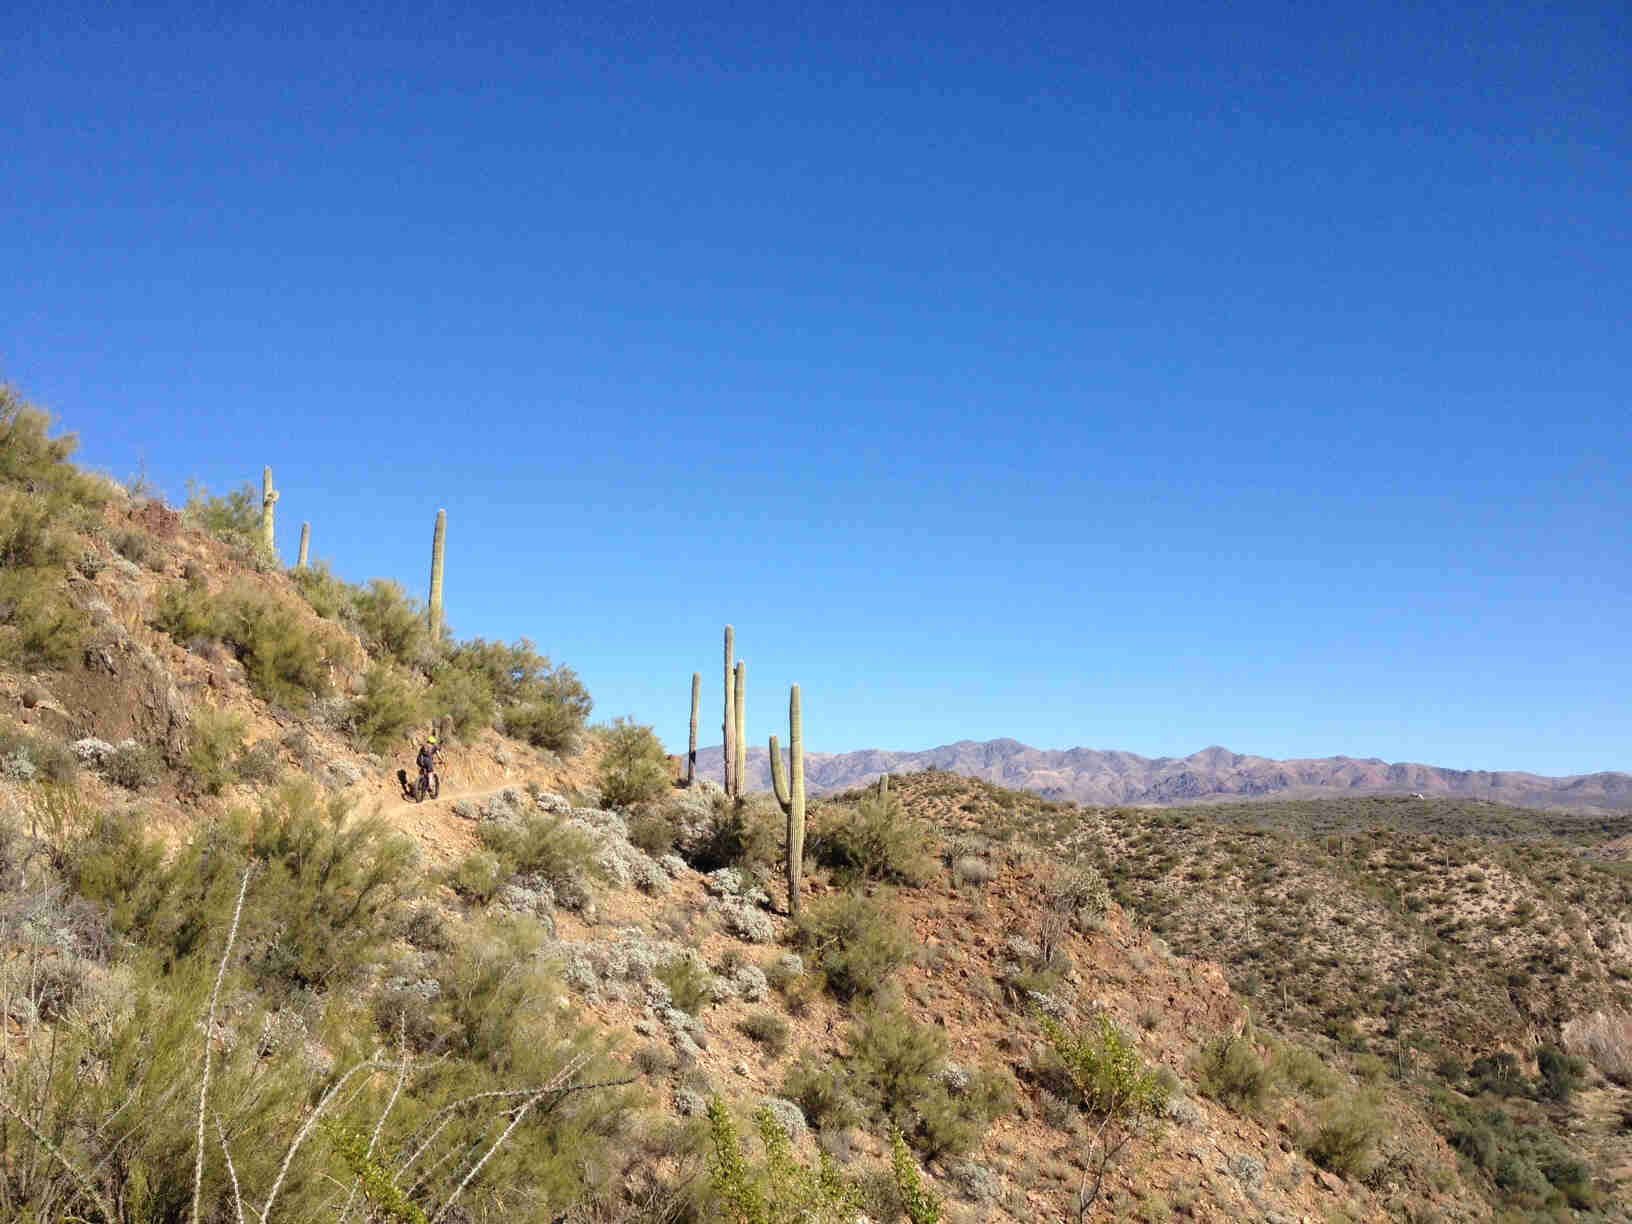 Distance rear view of a cyclist riding a Surly fat bike across a desert hill with bushes and cacti